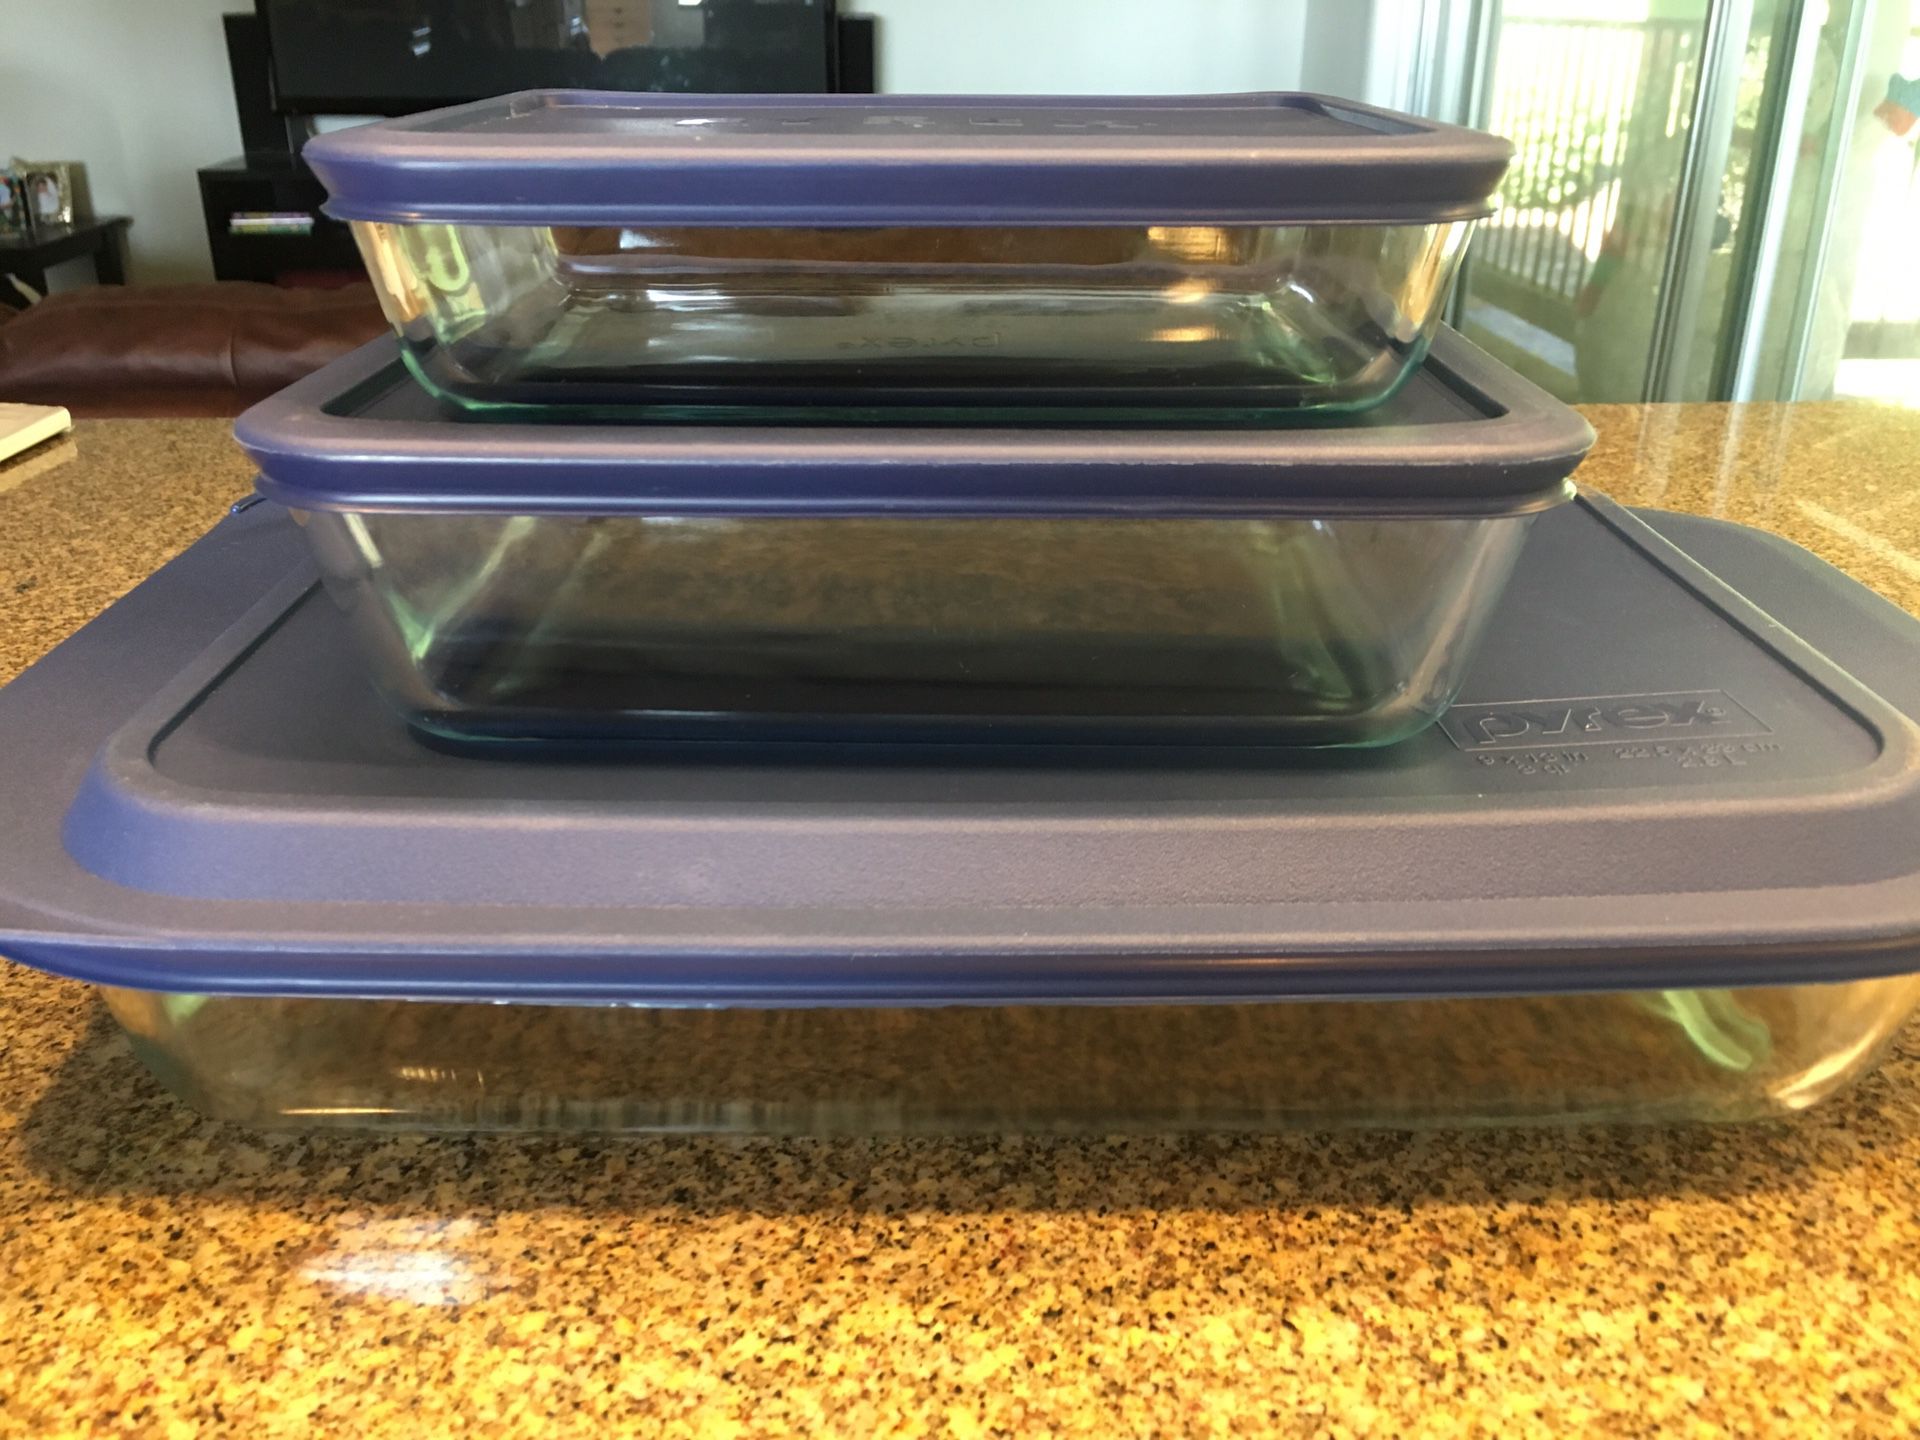 Pyrex set - 3 pans with lids! Barely used!